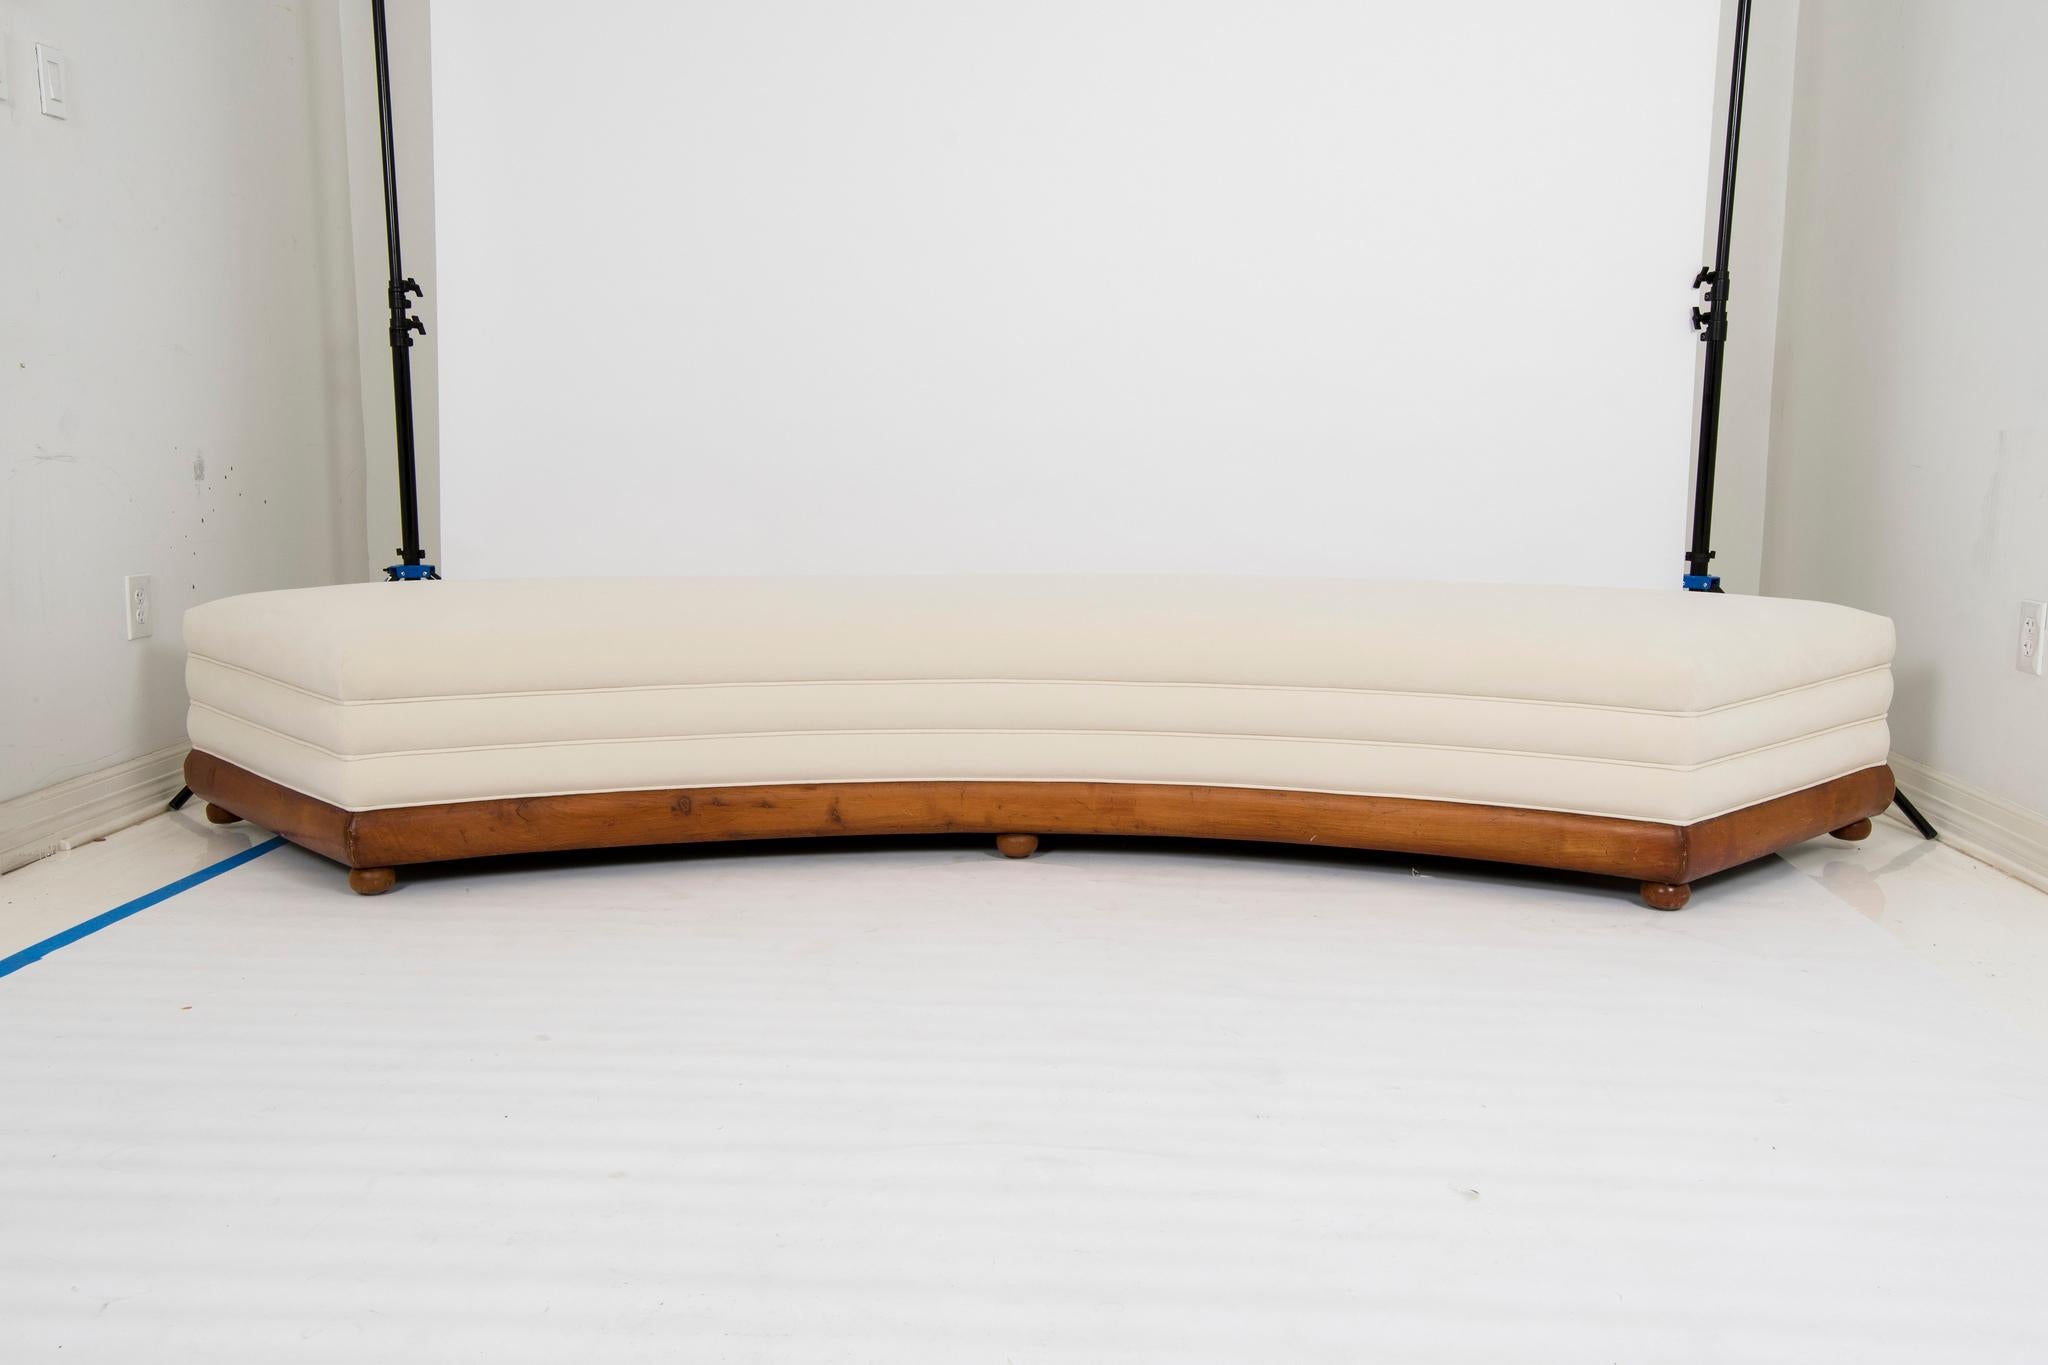 An elongated curved period Louis Philippe mahogany banquette newly upholstered with channeled sides in a creamy ecru low pile velvet.

Overall dimensions: 124